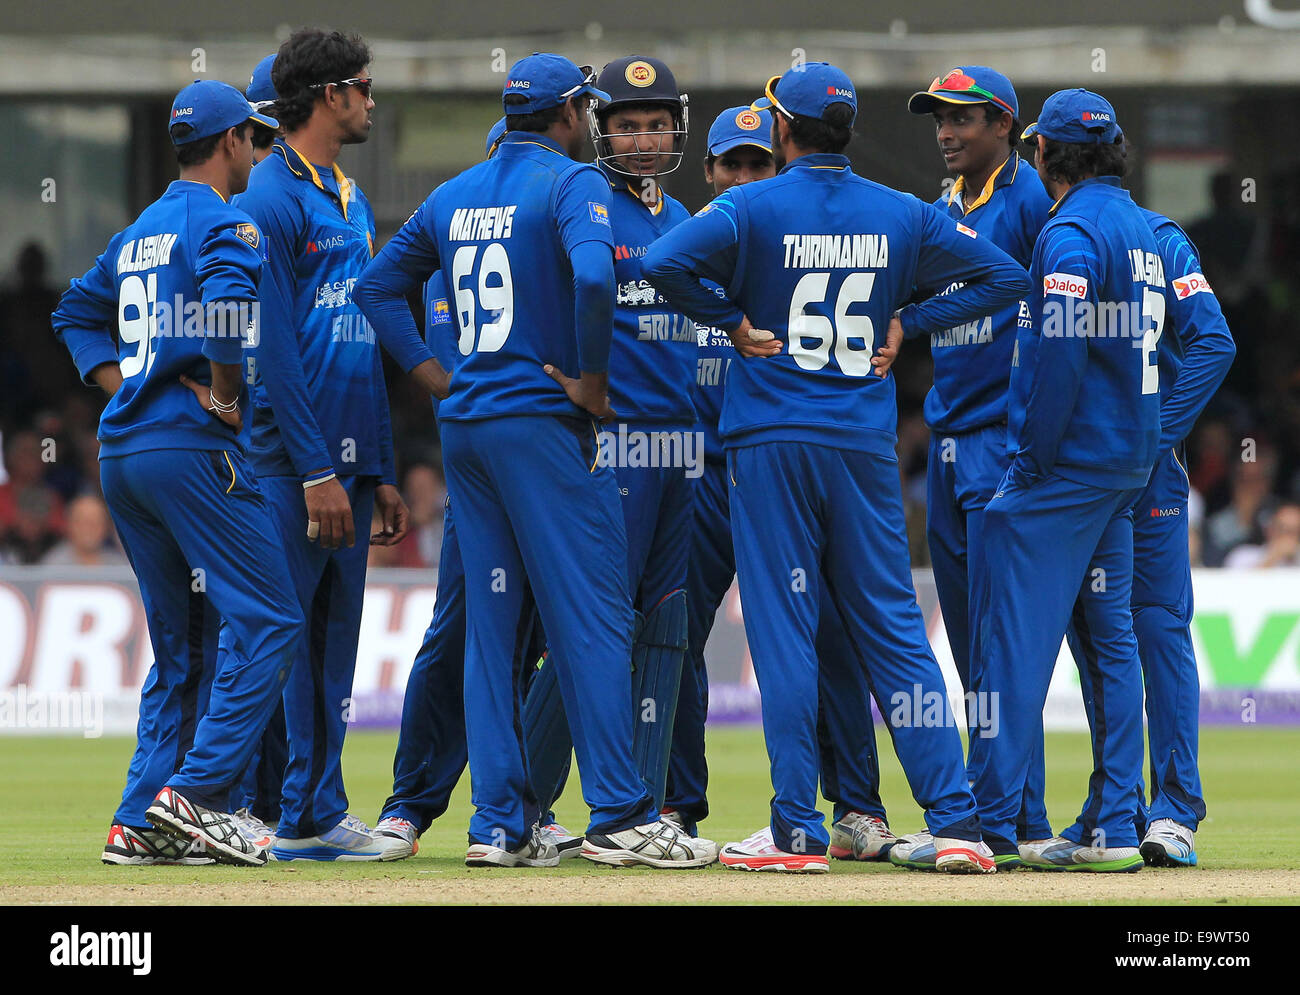 Cricket - Sri Lanka players celebrate taking an England wicket in a One Day International match at Lord's in 2014. Stock Photo